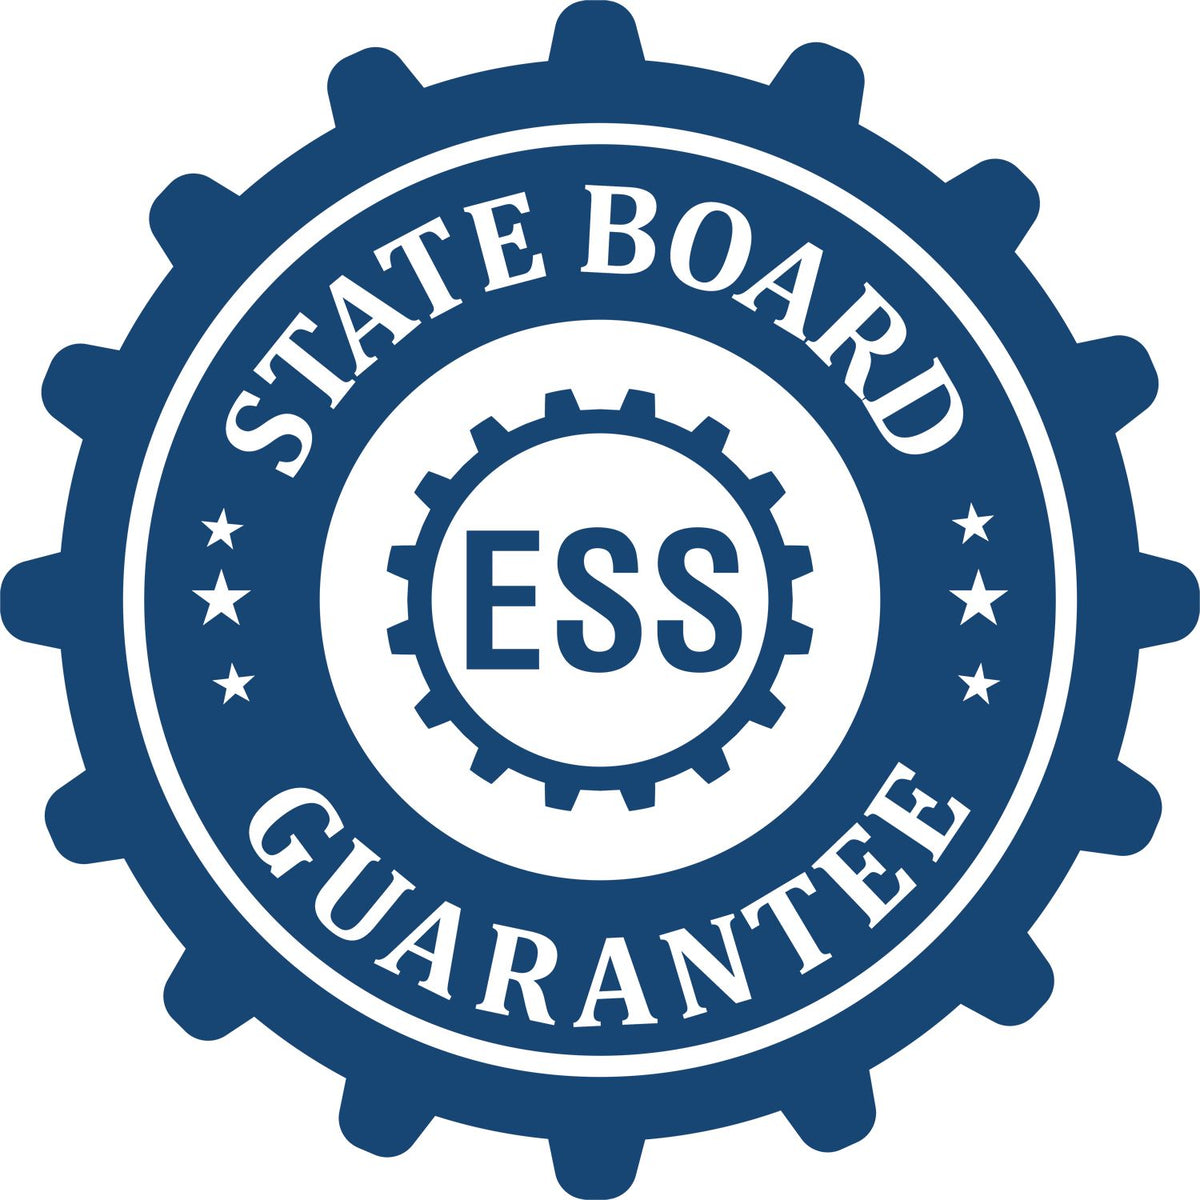 An emblem in a gear shape illustrating a state board guarantee for the Wooden Handle Michigan State Seal Notary Public Stamp product.